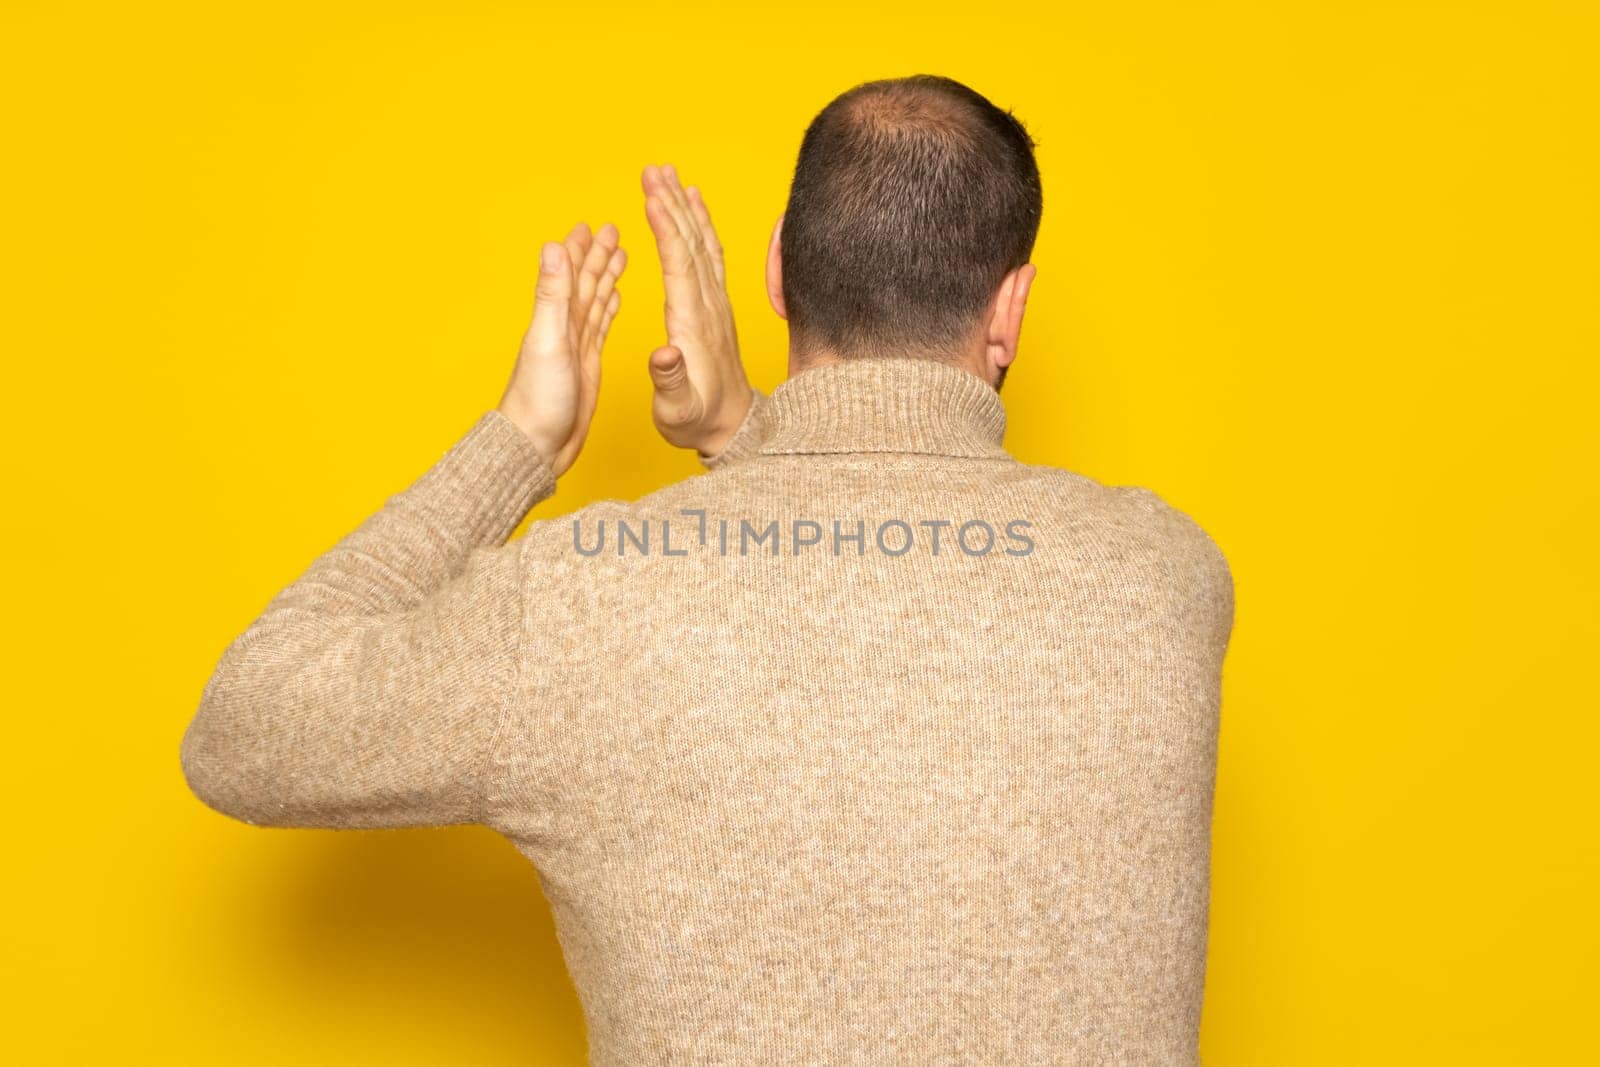 Man with alopecia problem energetically patting his back, excited by the spectacle he has just witnessed. Isolated on yellow background.